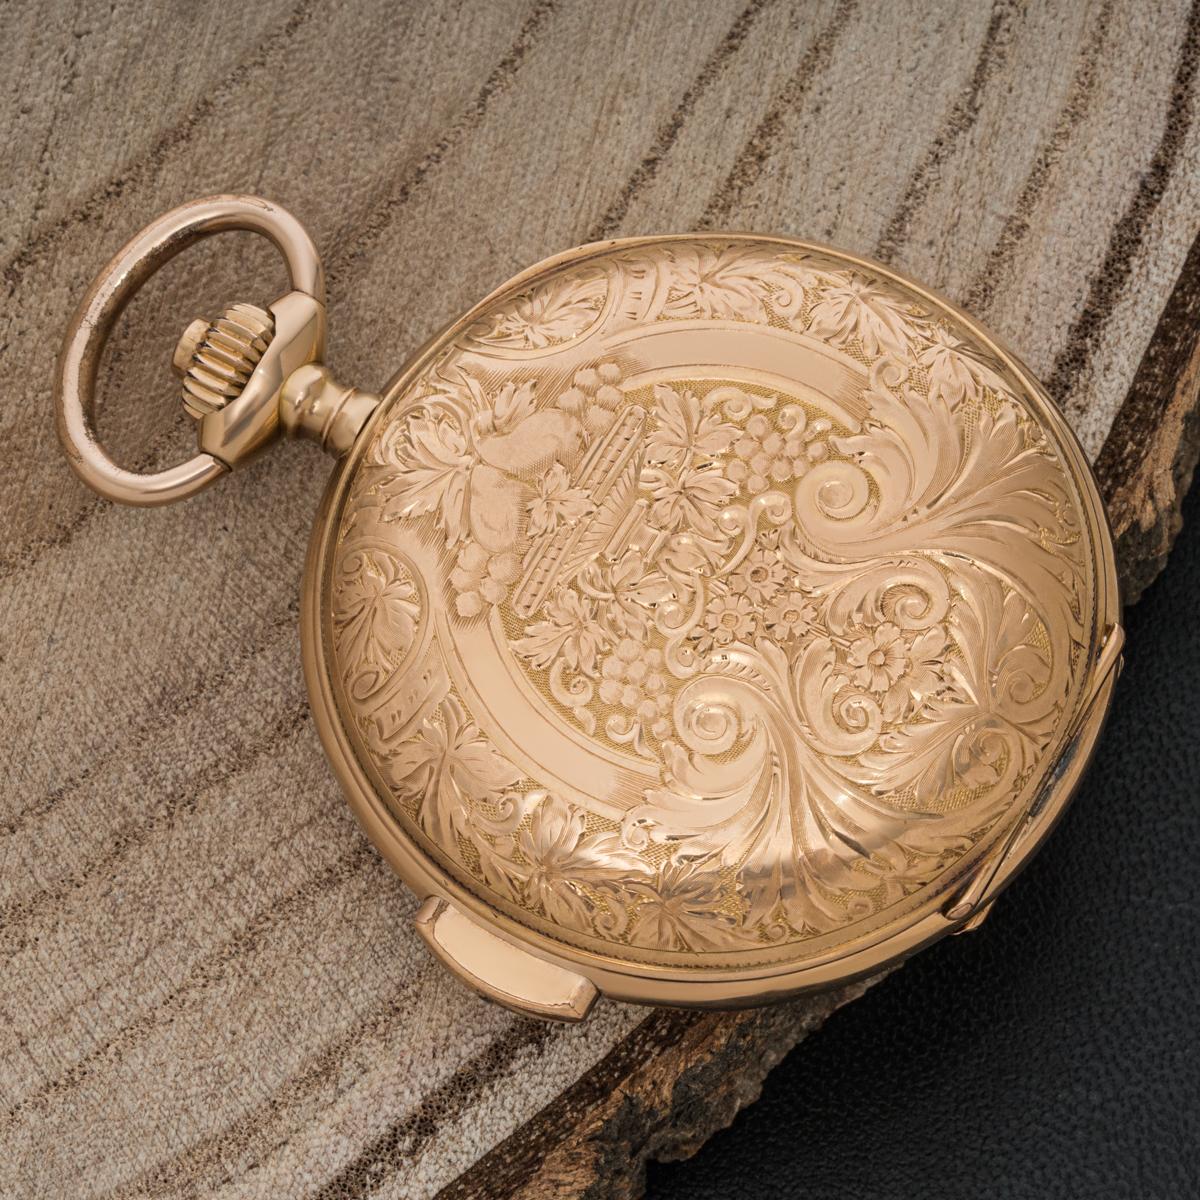 Volta Rose Gold Minute Repeater Keyless Lever Full Hunter Pocket Watch C1880 For Sale 4